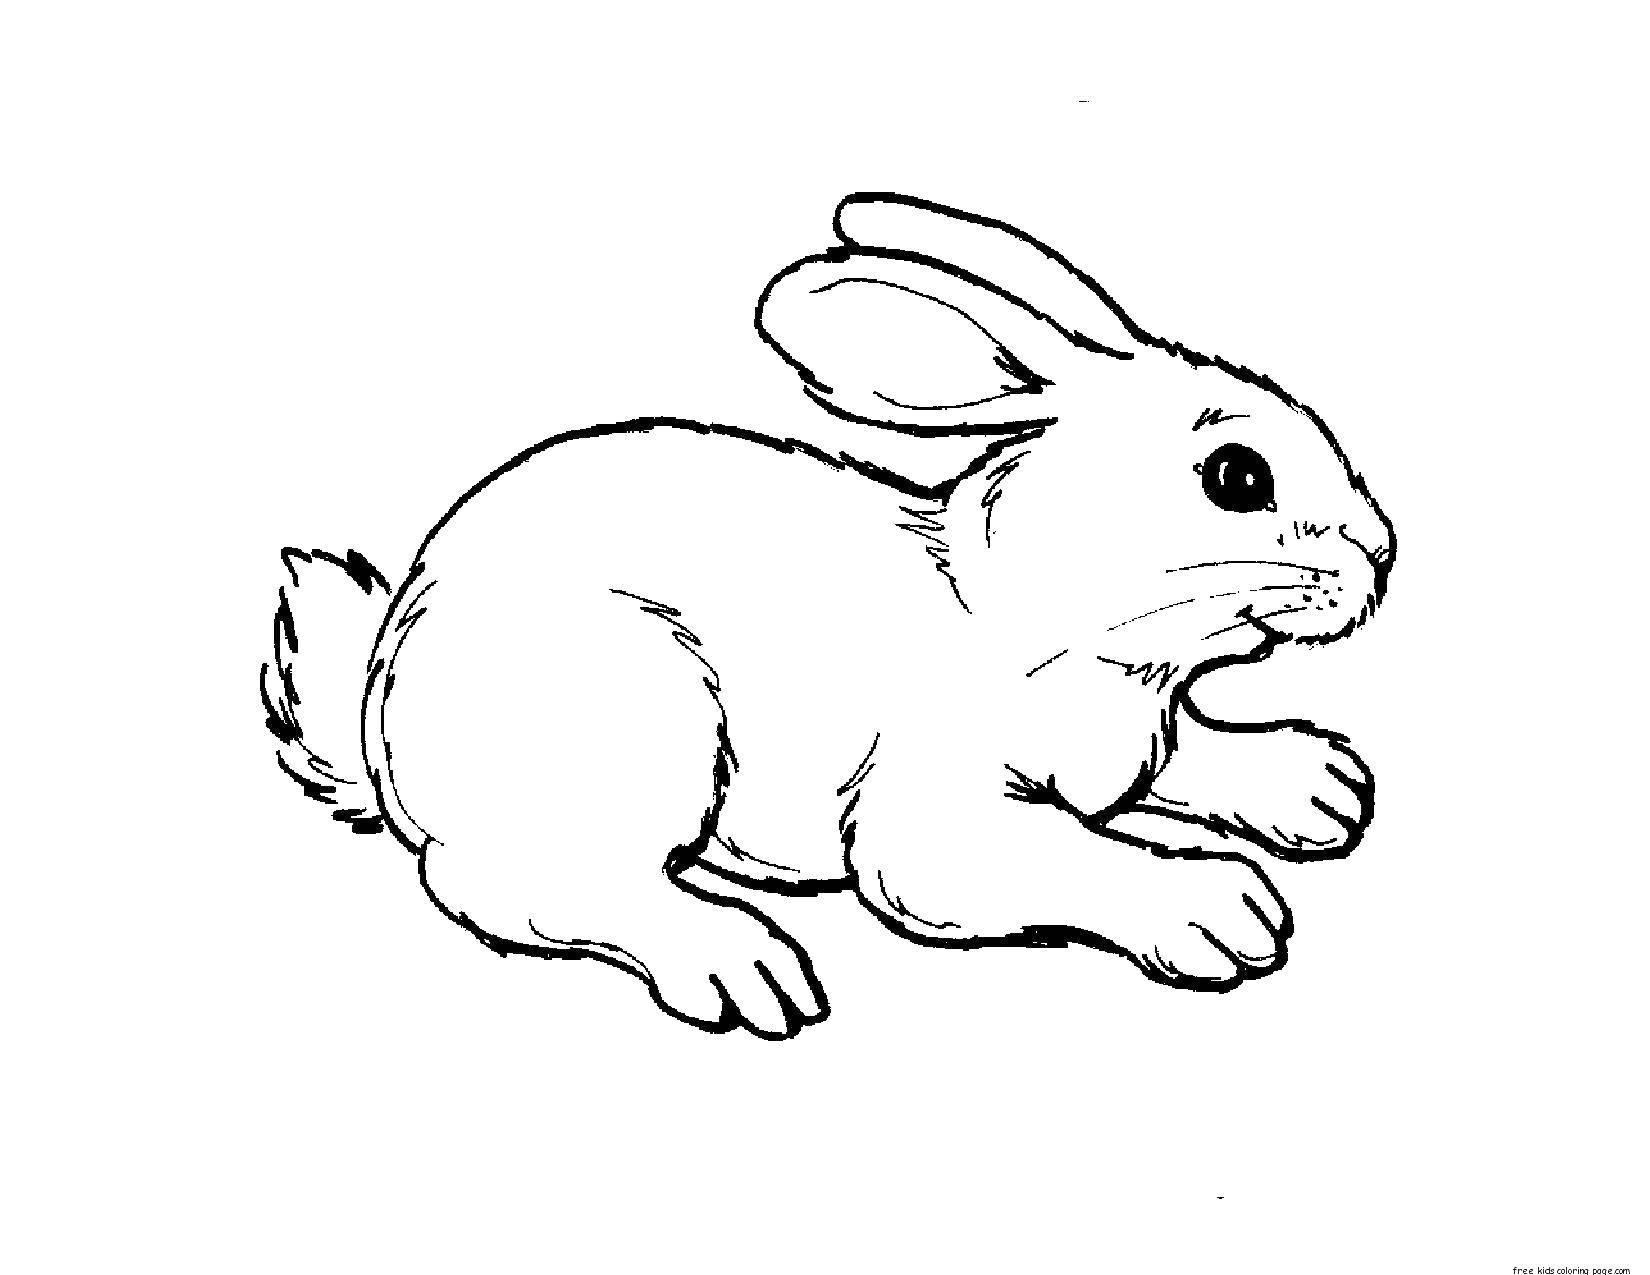 Coloring Rabbit. Category animals. Tags:  the rabbit.